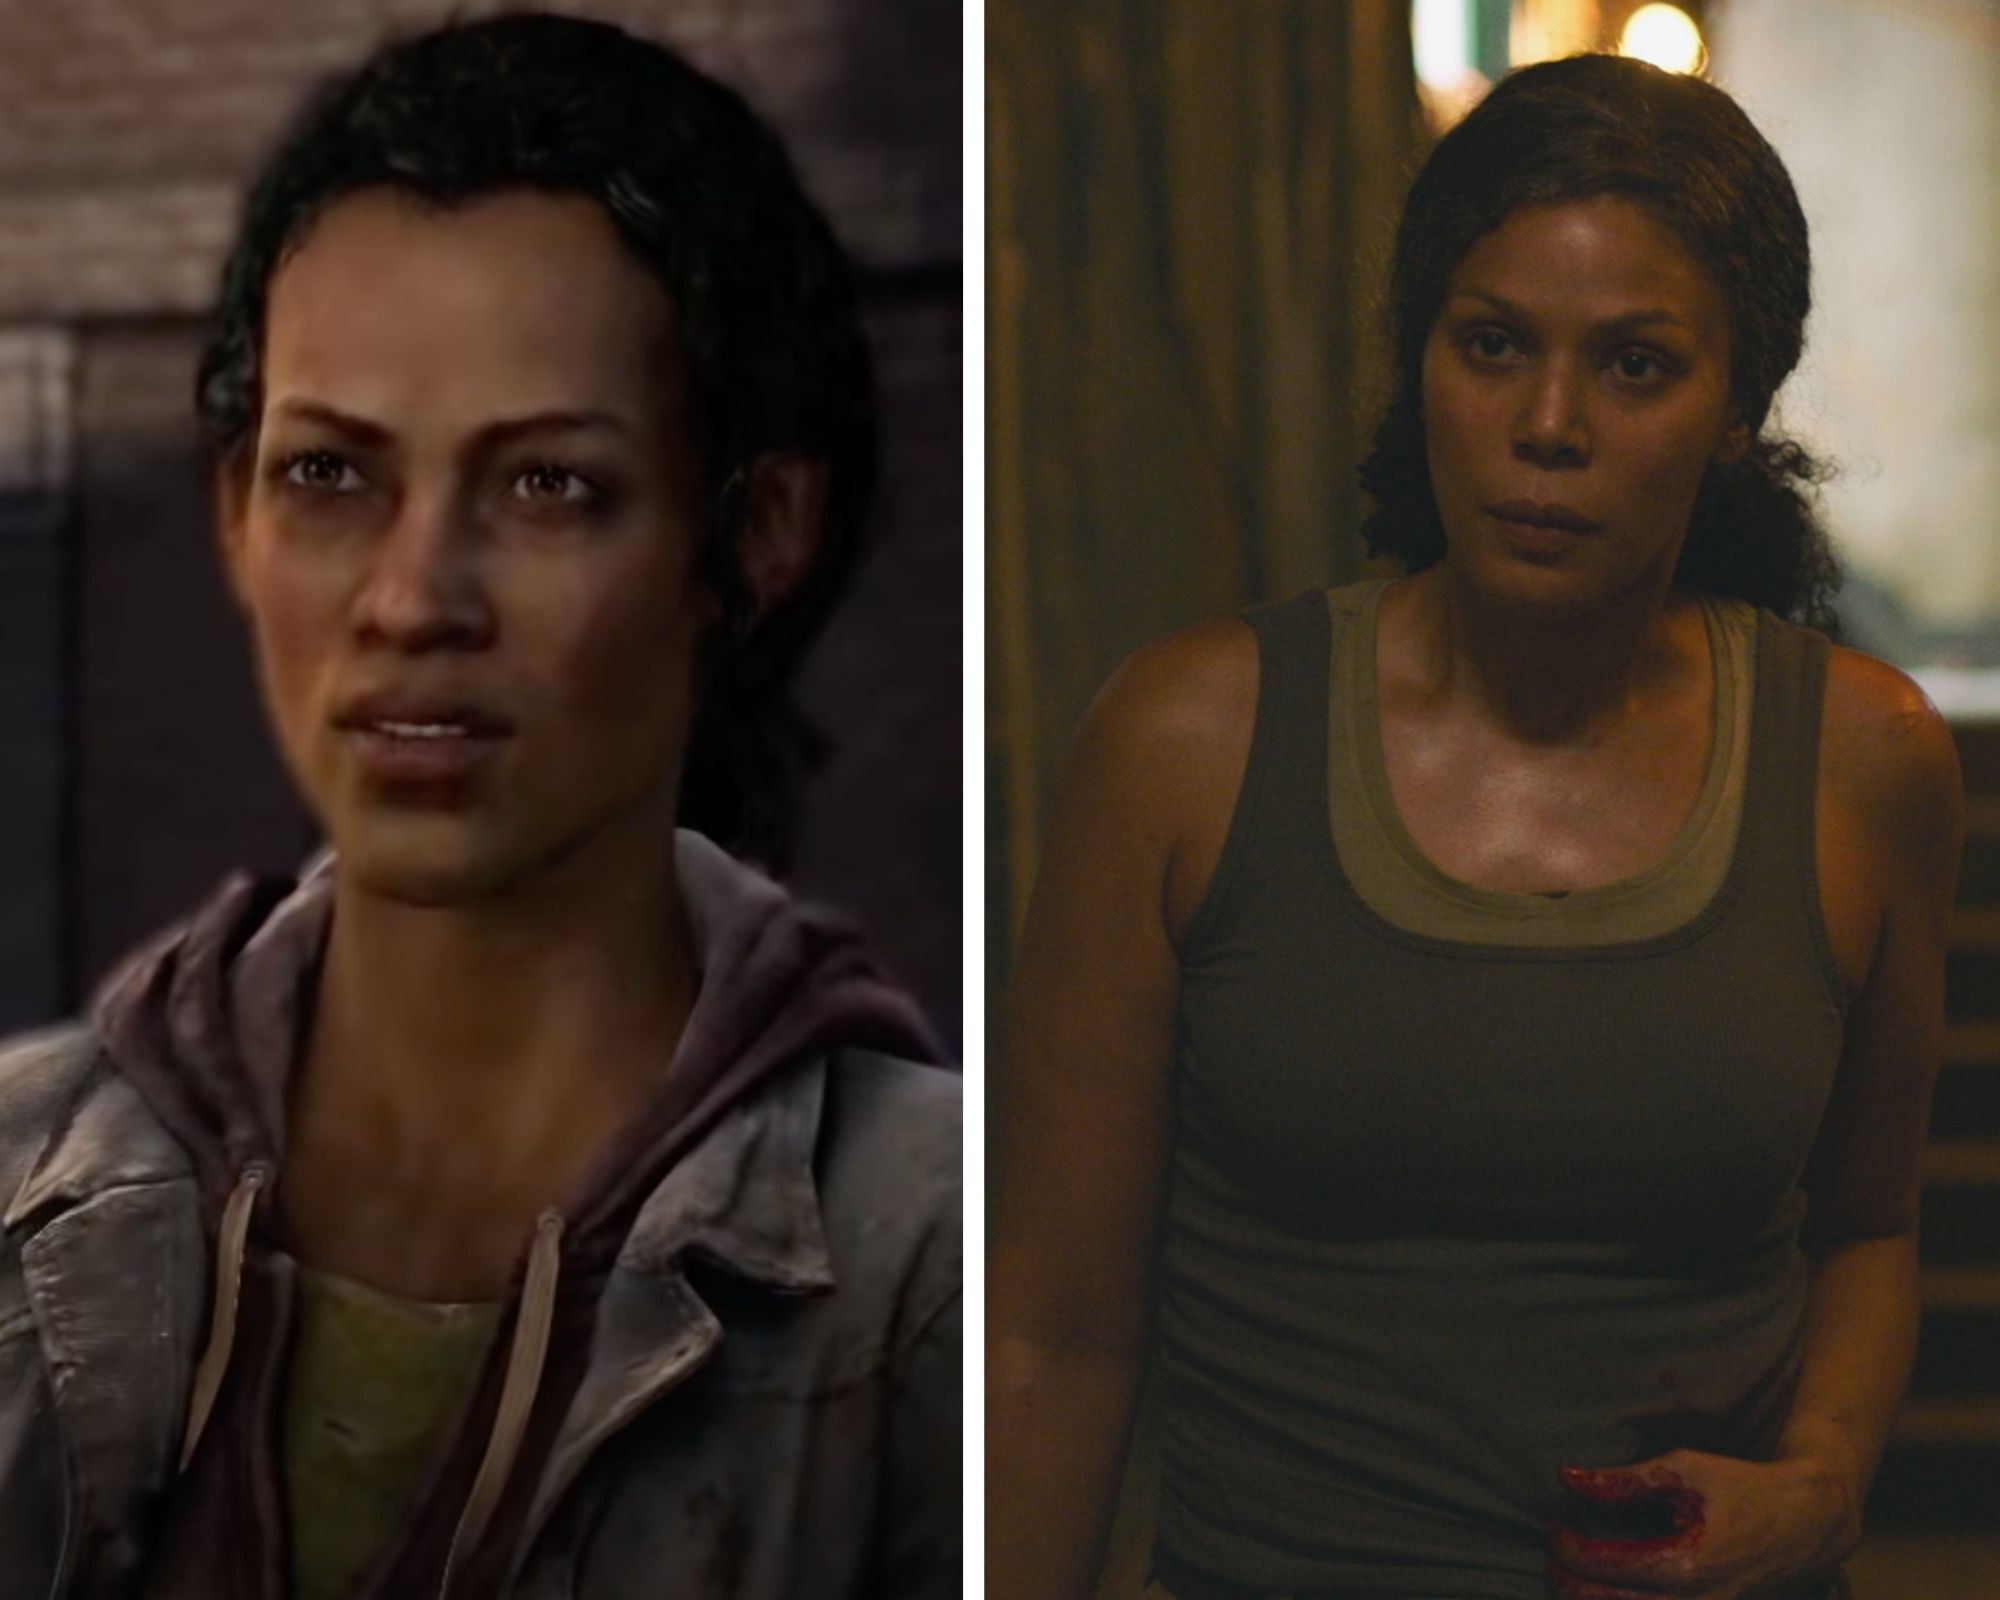 Marlene video game character and Marlene in The Last of Us TV show